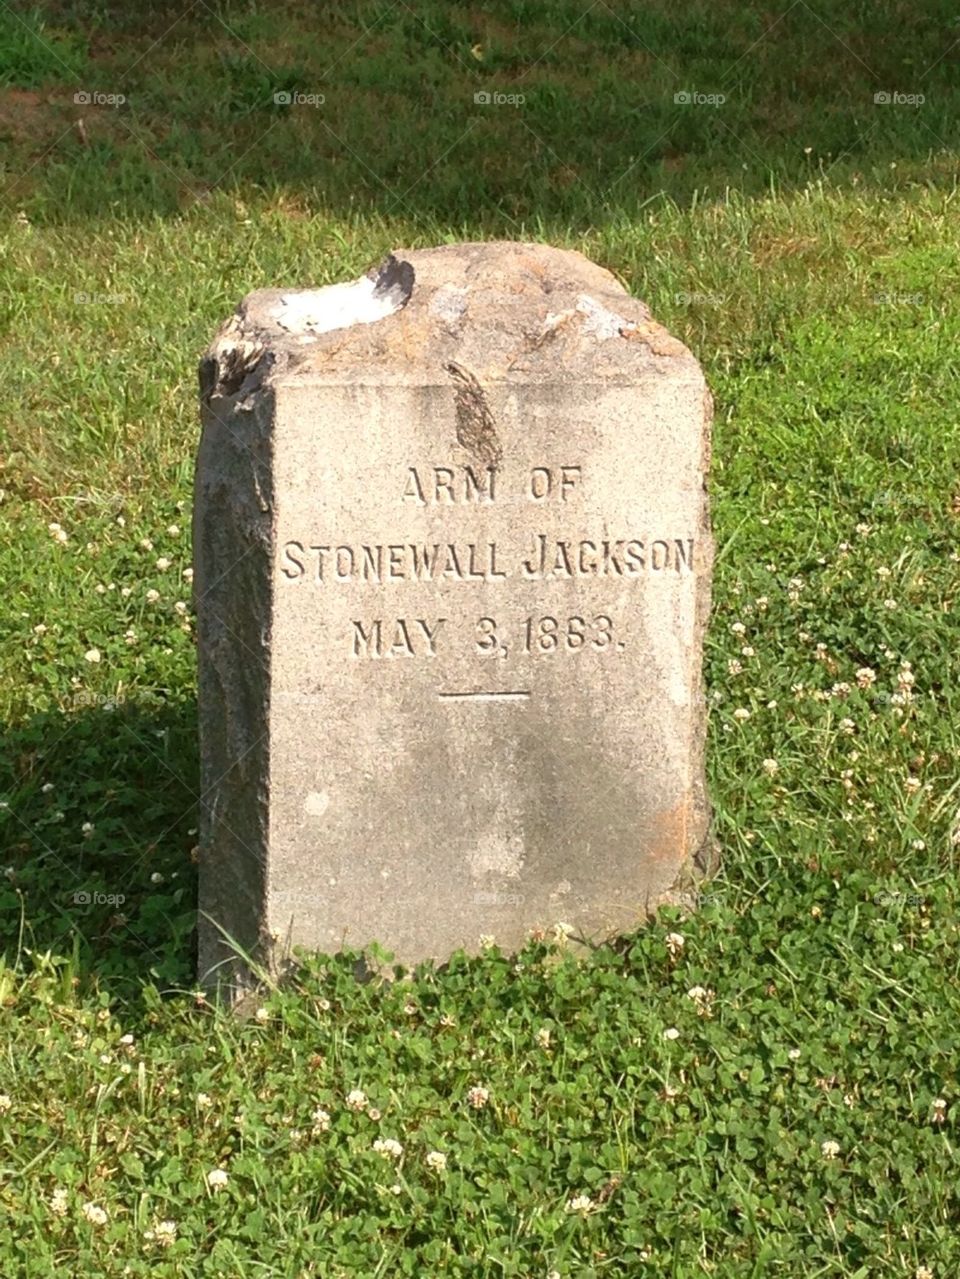 Burial of the arm of Stonewall Jackson